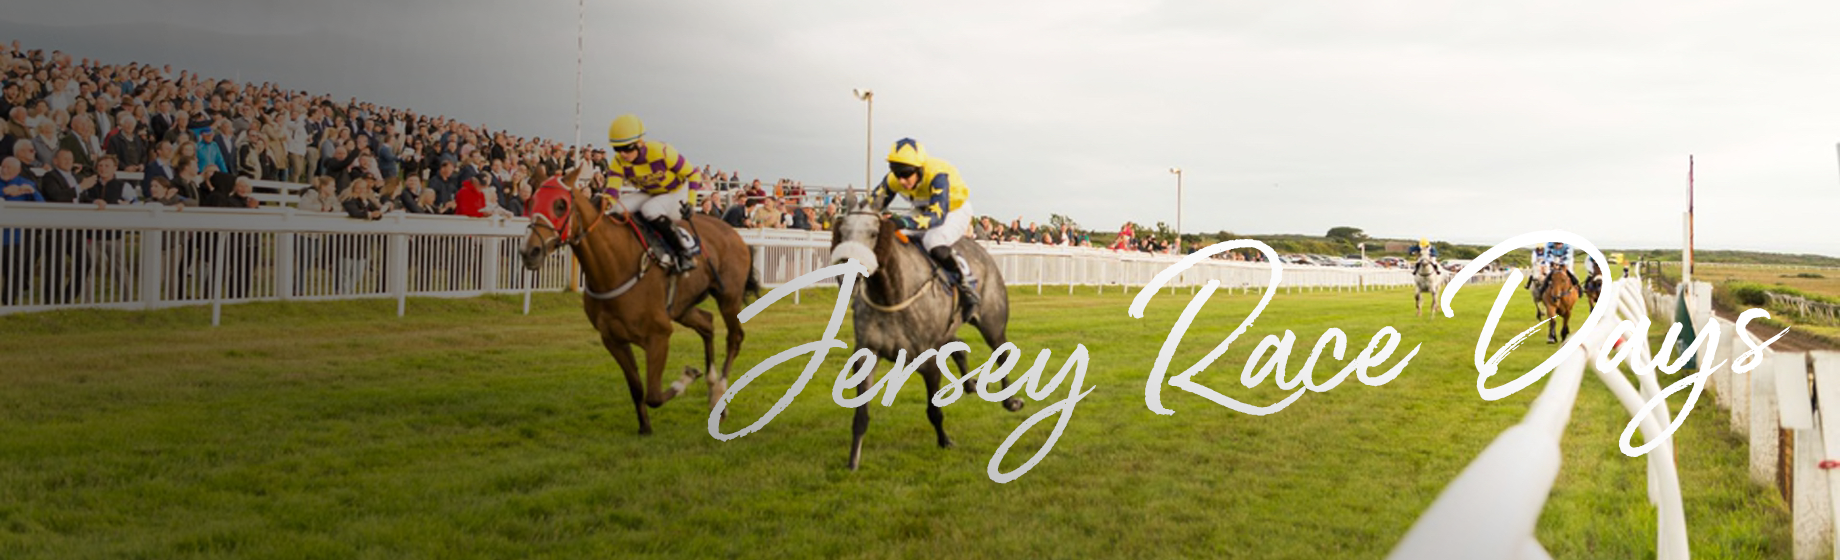 Jersey Race Day 2